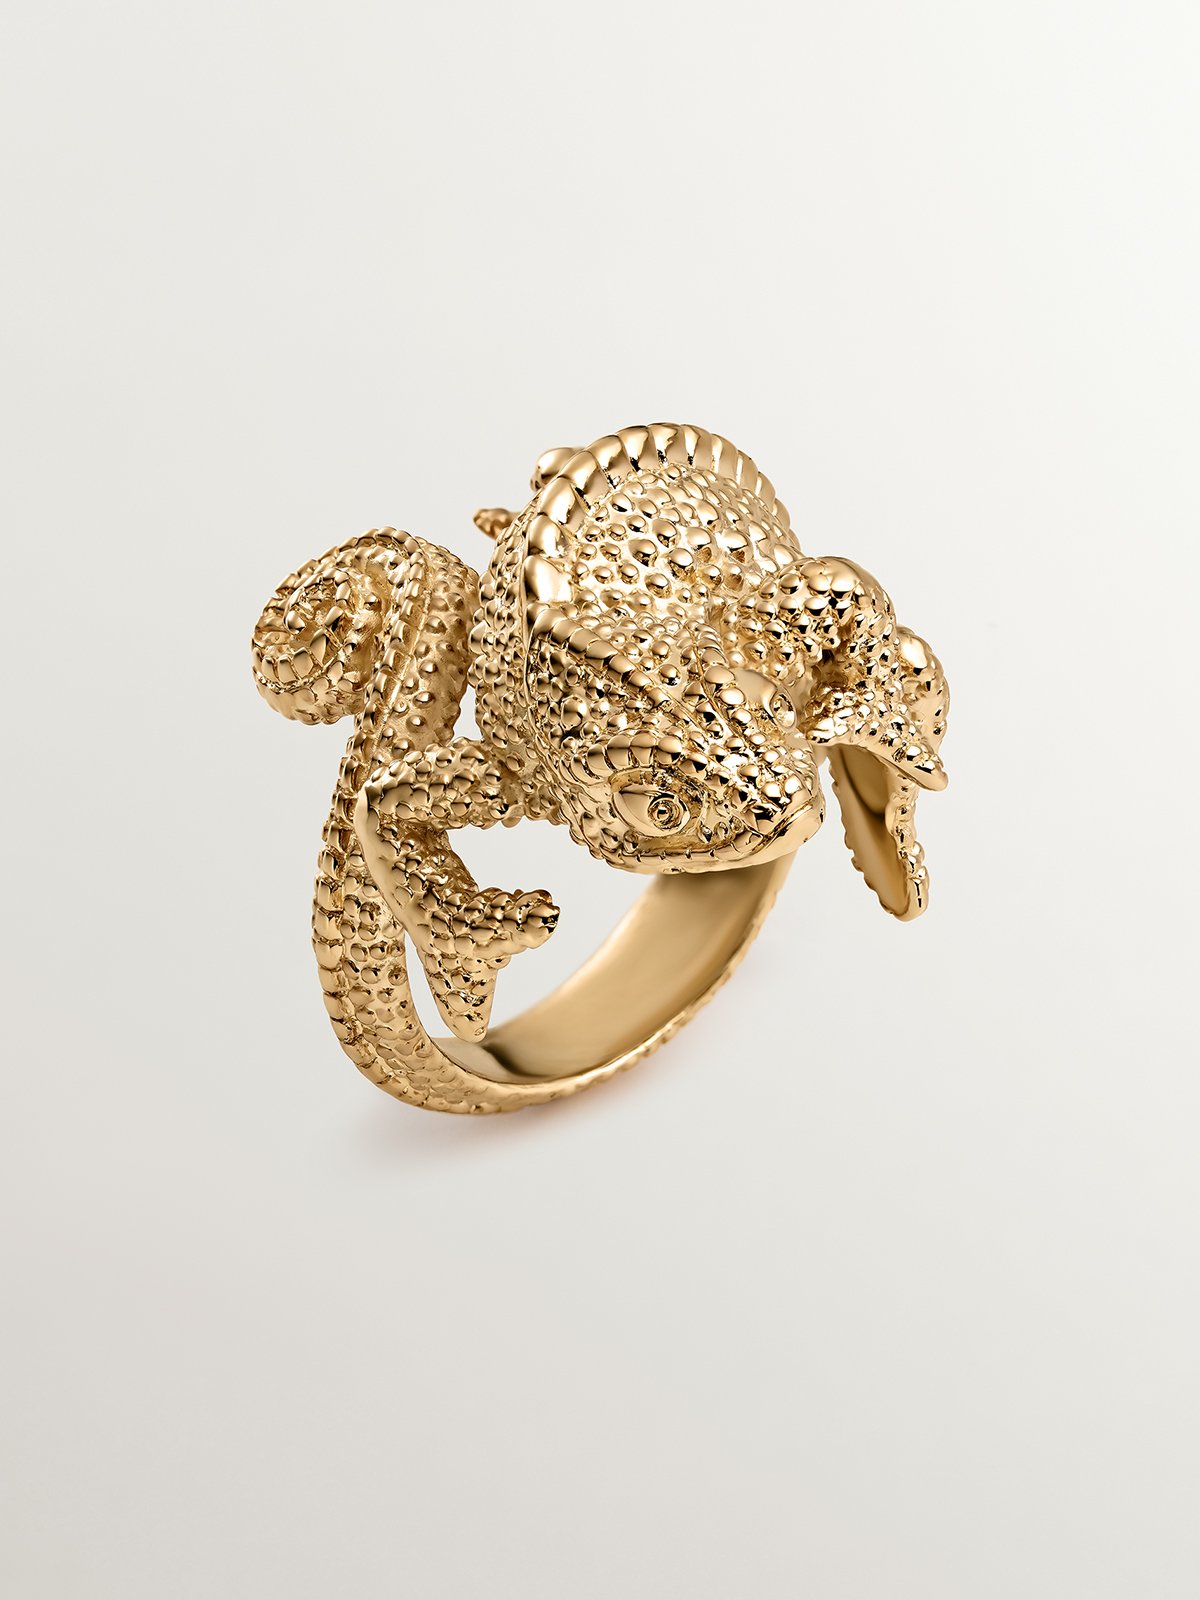 Wide 925 silver ring bathed in 18K yellow gold in the shape of a chameleon.